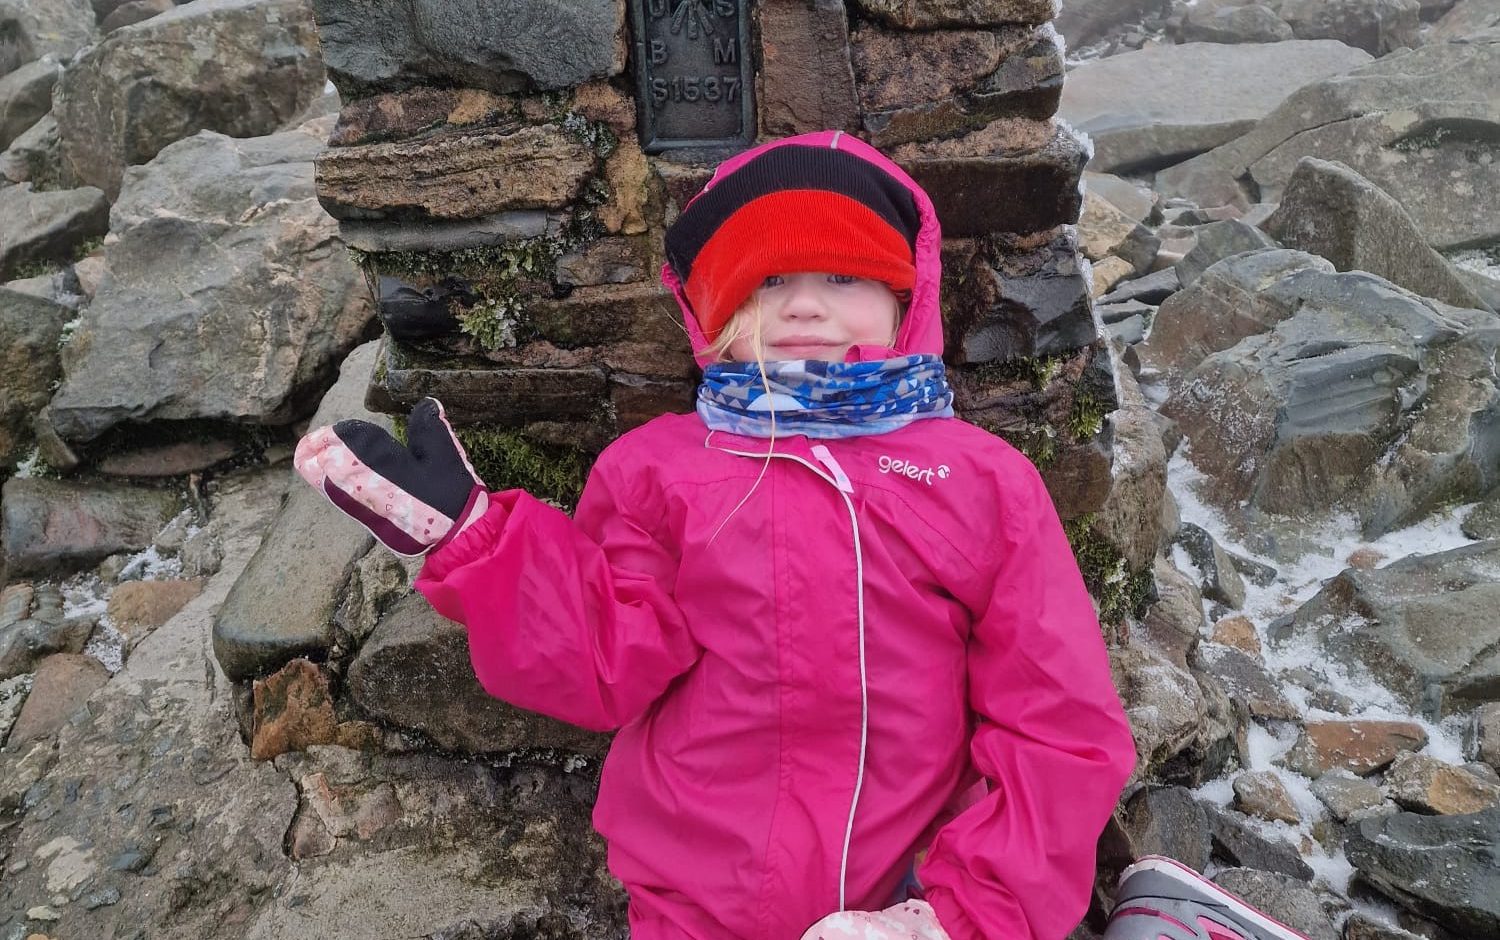 Five-year-old girl becomes youngest to climb Britain’s highest peaks